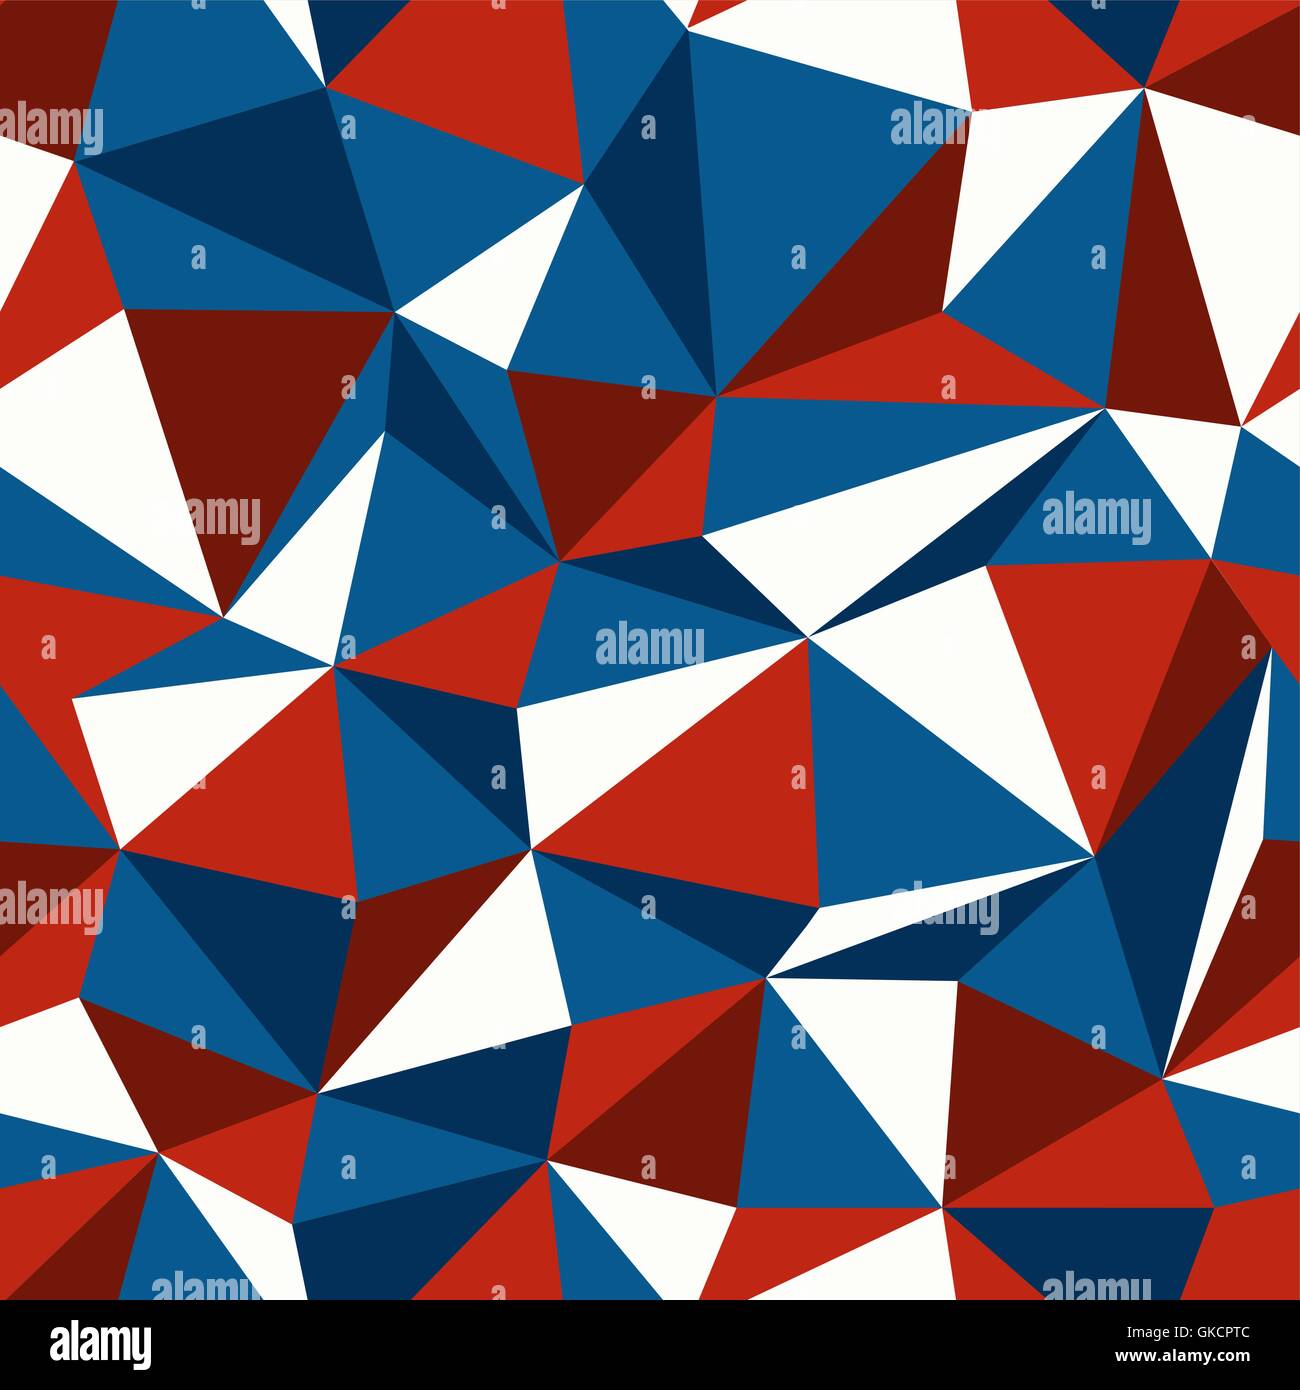 American Patriotic Themed Colors Triangle Seamless Pattern Stock Vector